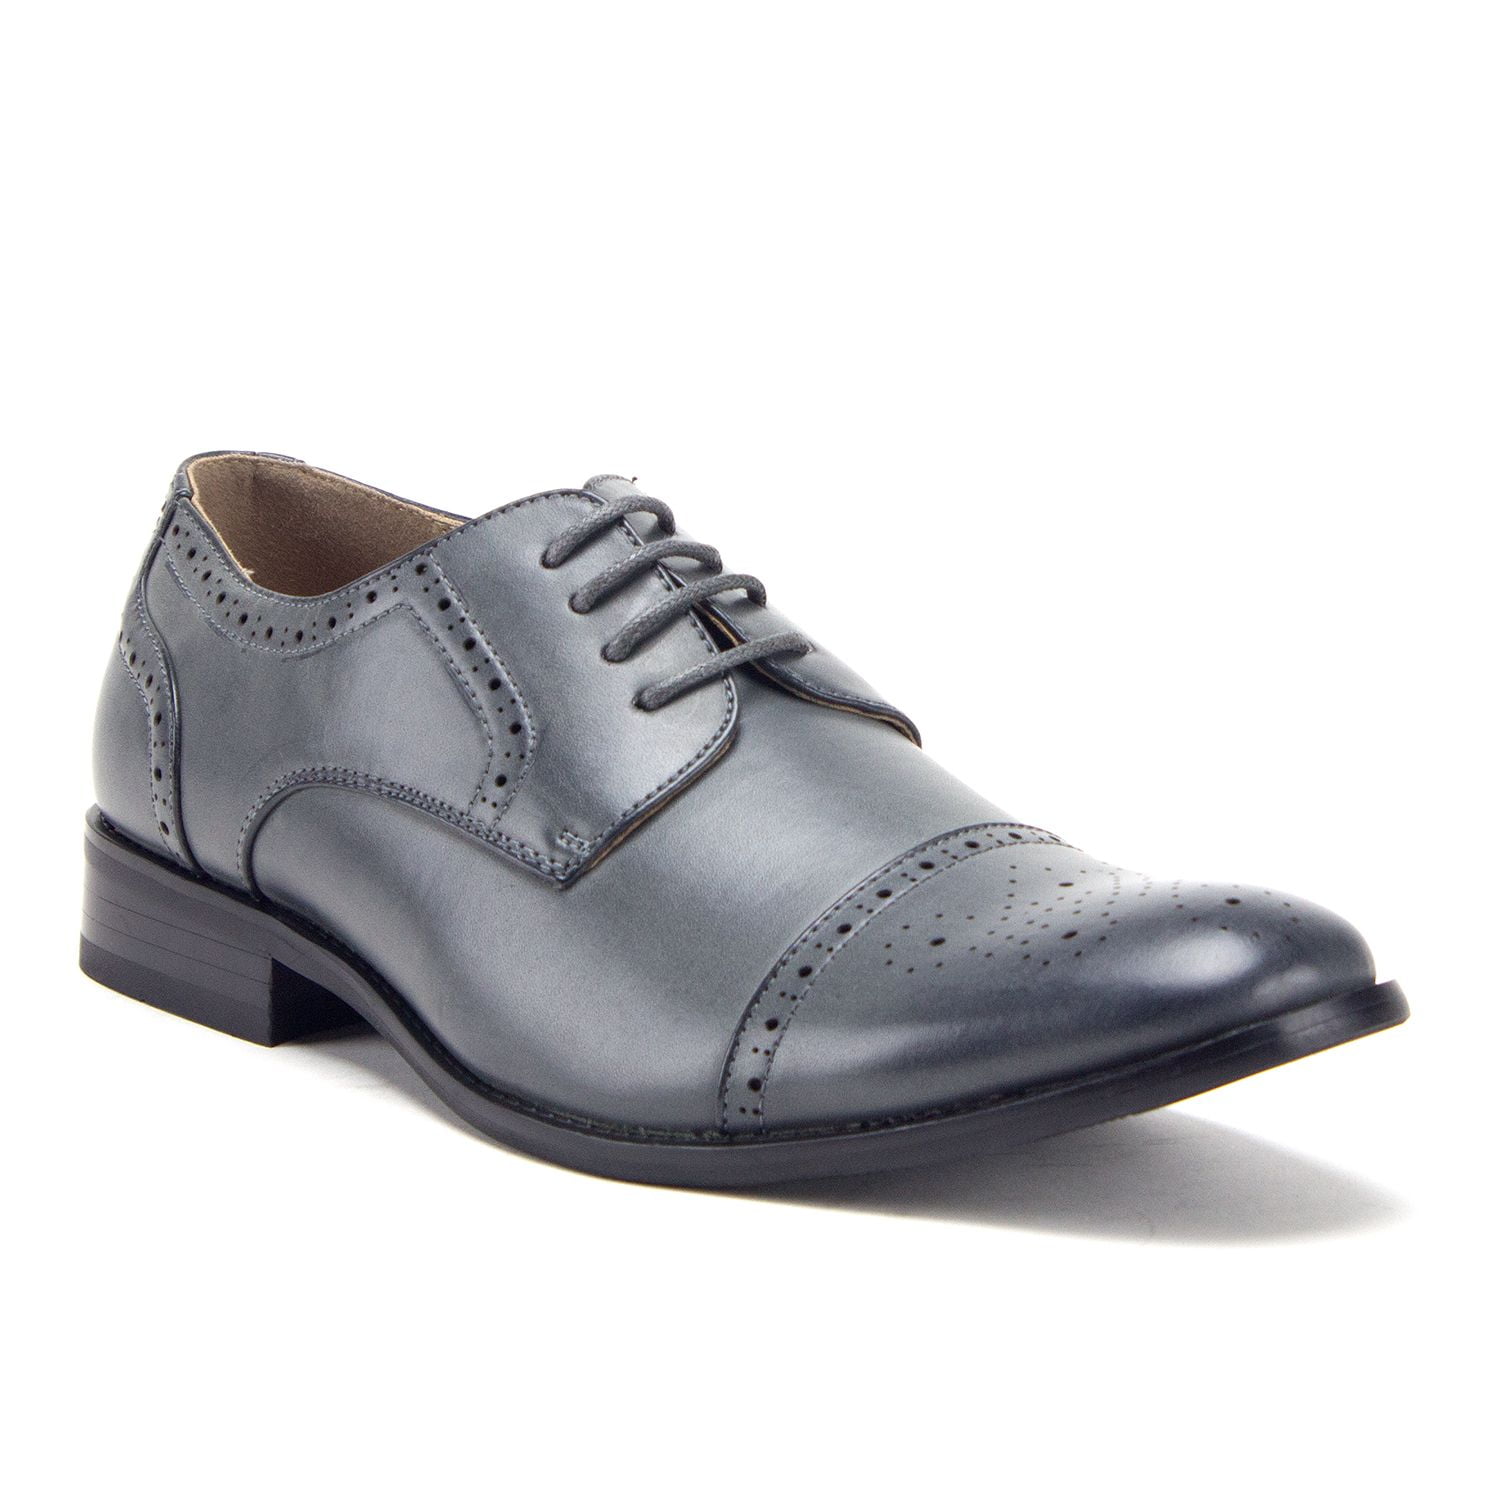 Men's 95733 Leather Lined Perforated Cap Toe Oxford Dress Shoes, Grey ...